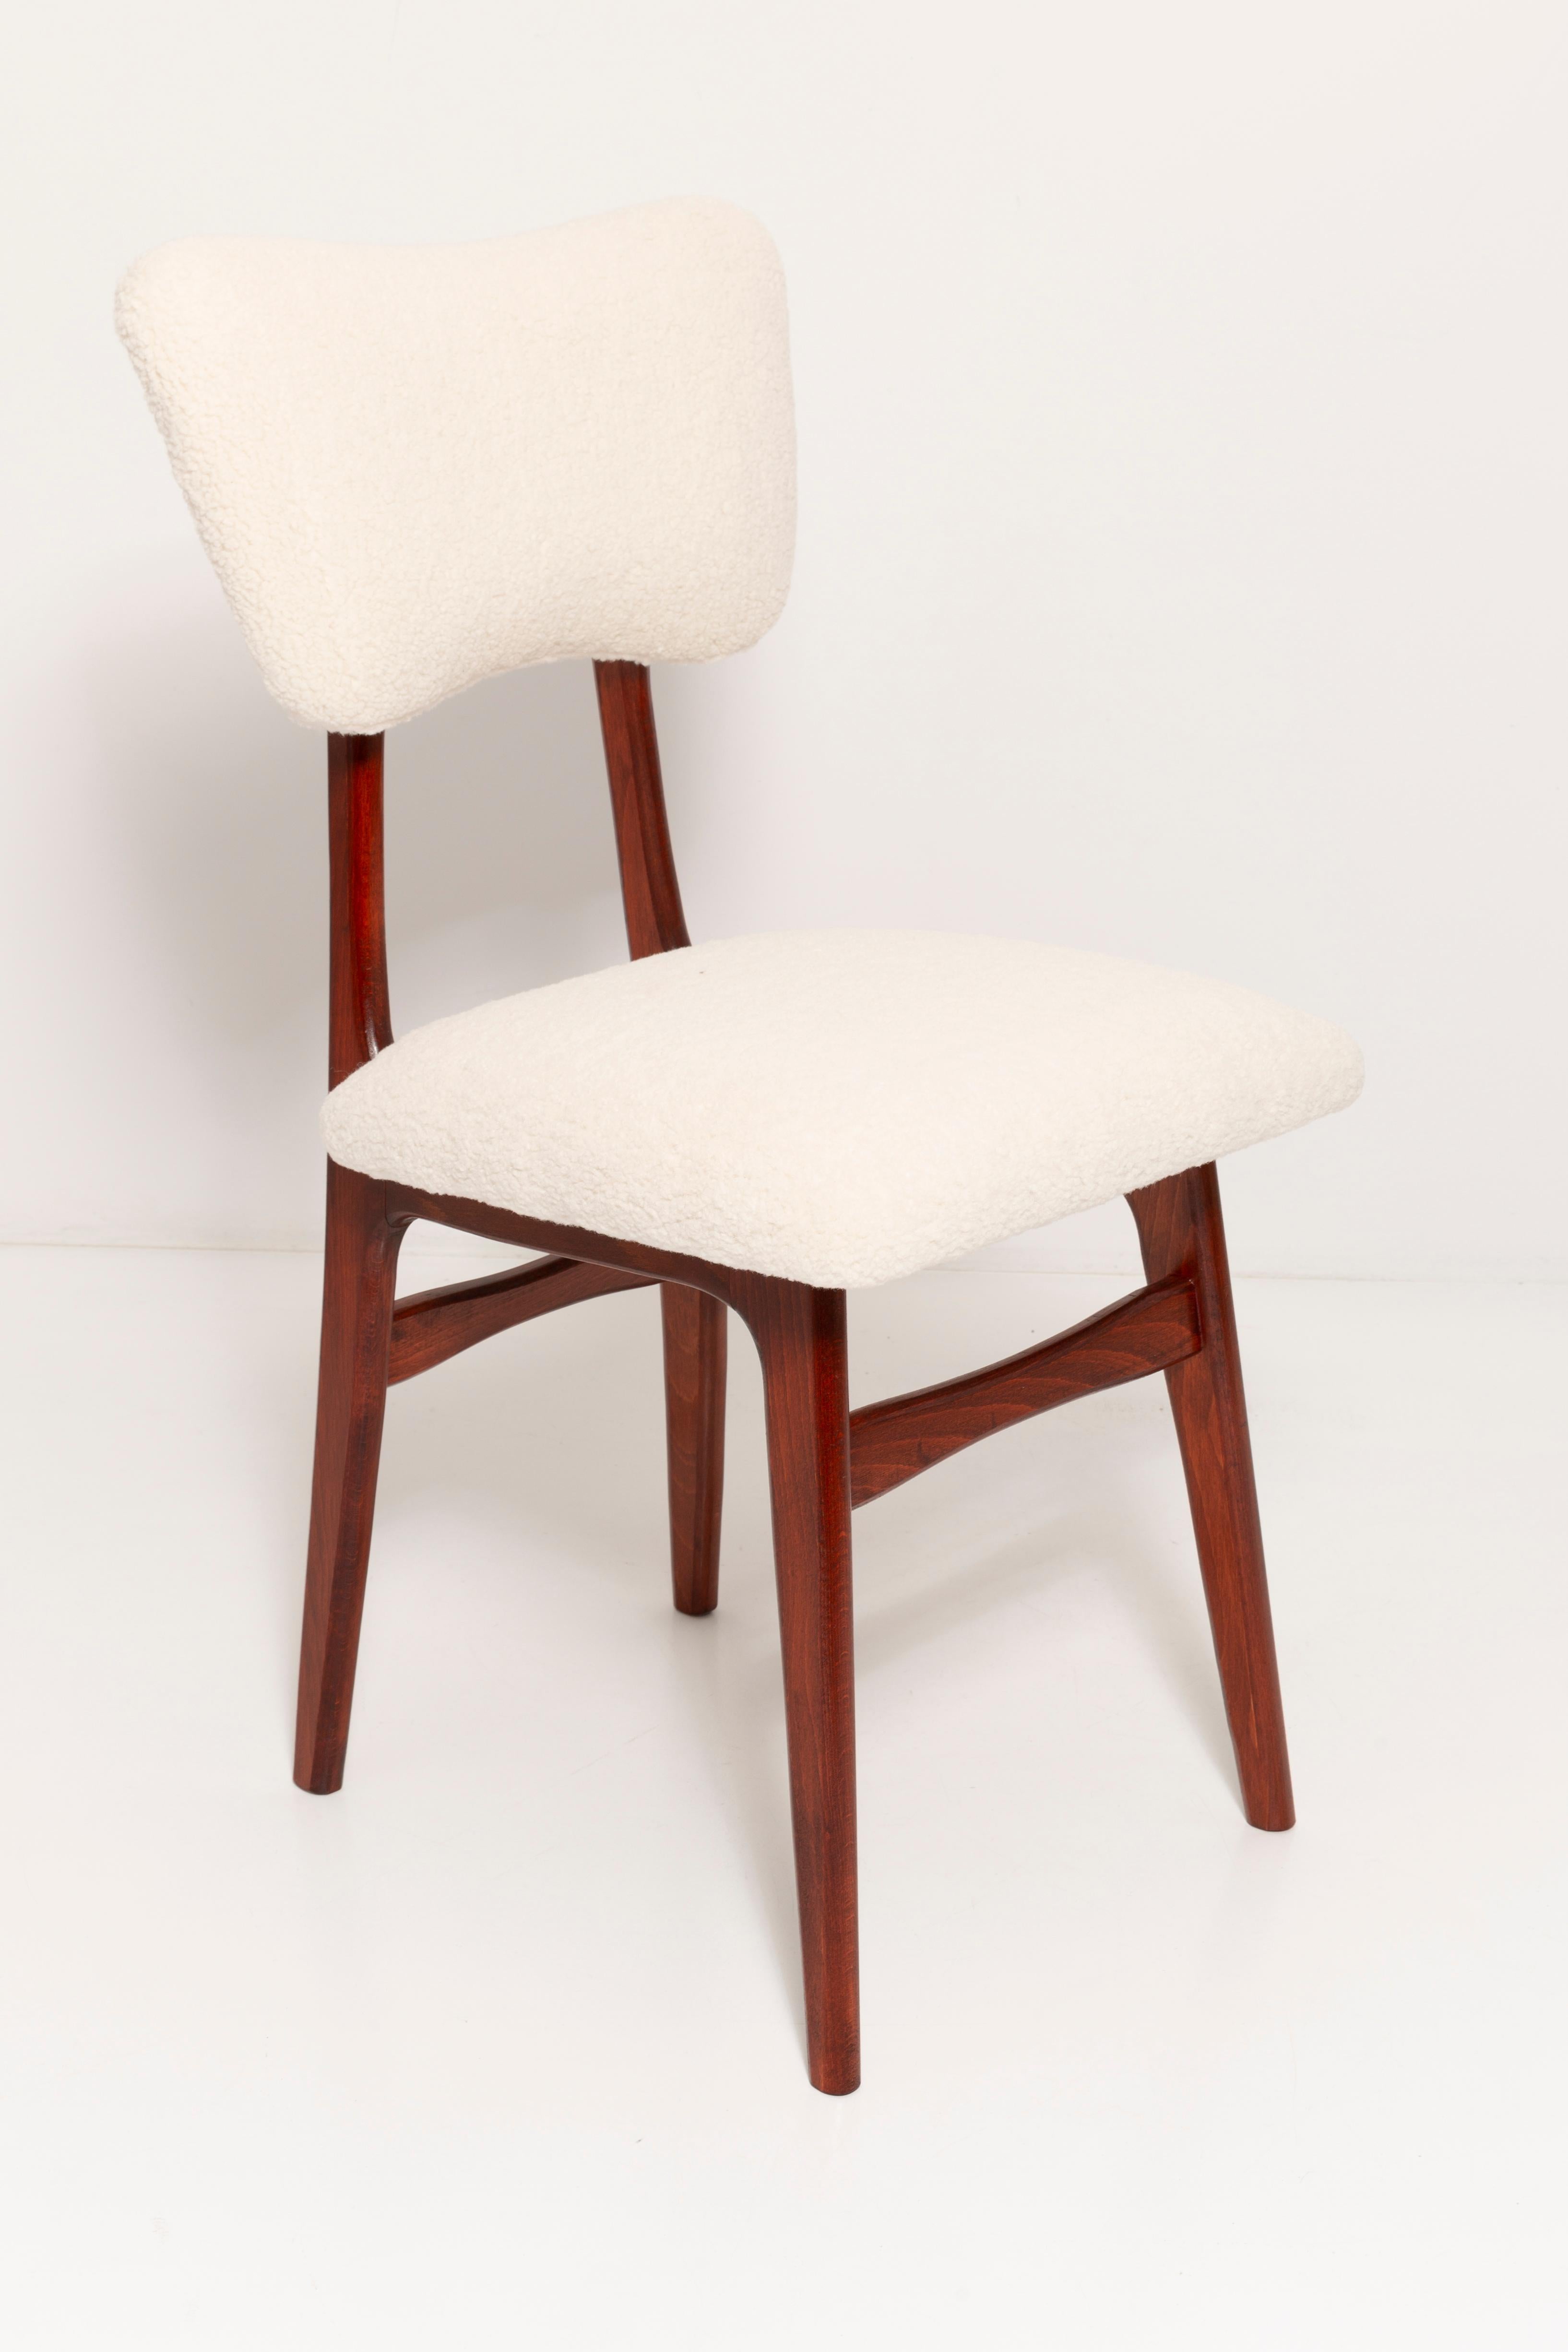 Chairs designed by Prof. Rajmund Halas. Made of beechwood. Chair is after a complete upholstery renovation; the woodwork has been refreshed and painted in cherry lacquer. Seat and back is dressed in crème, durable and pleasant to the touch italian